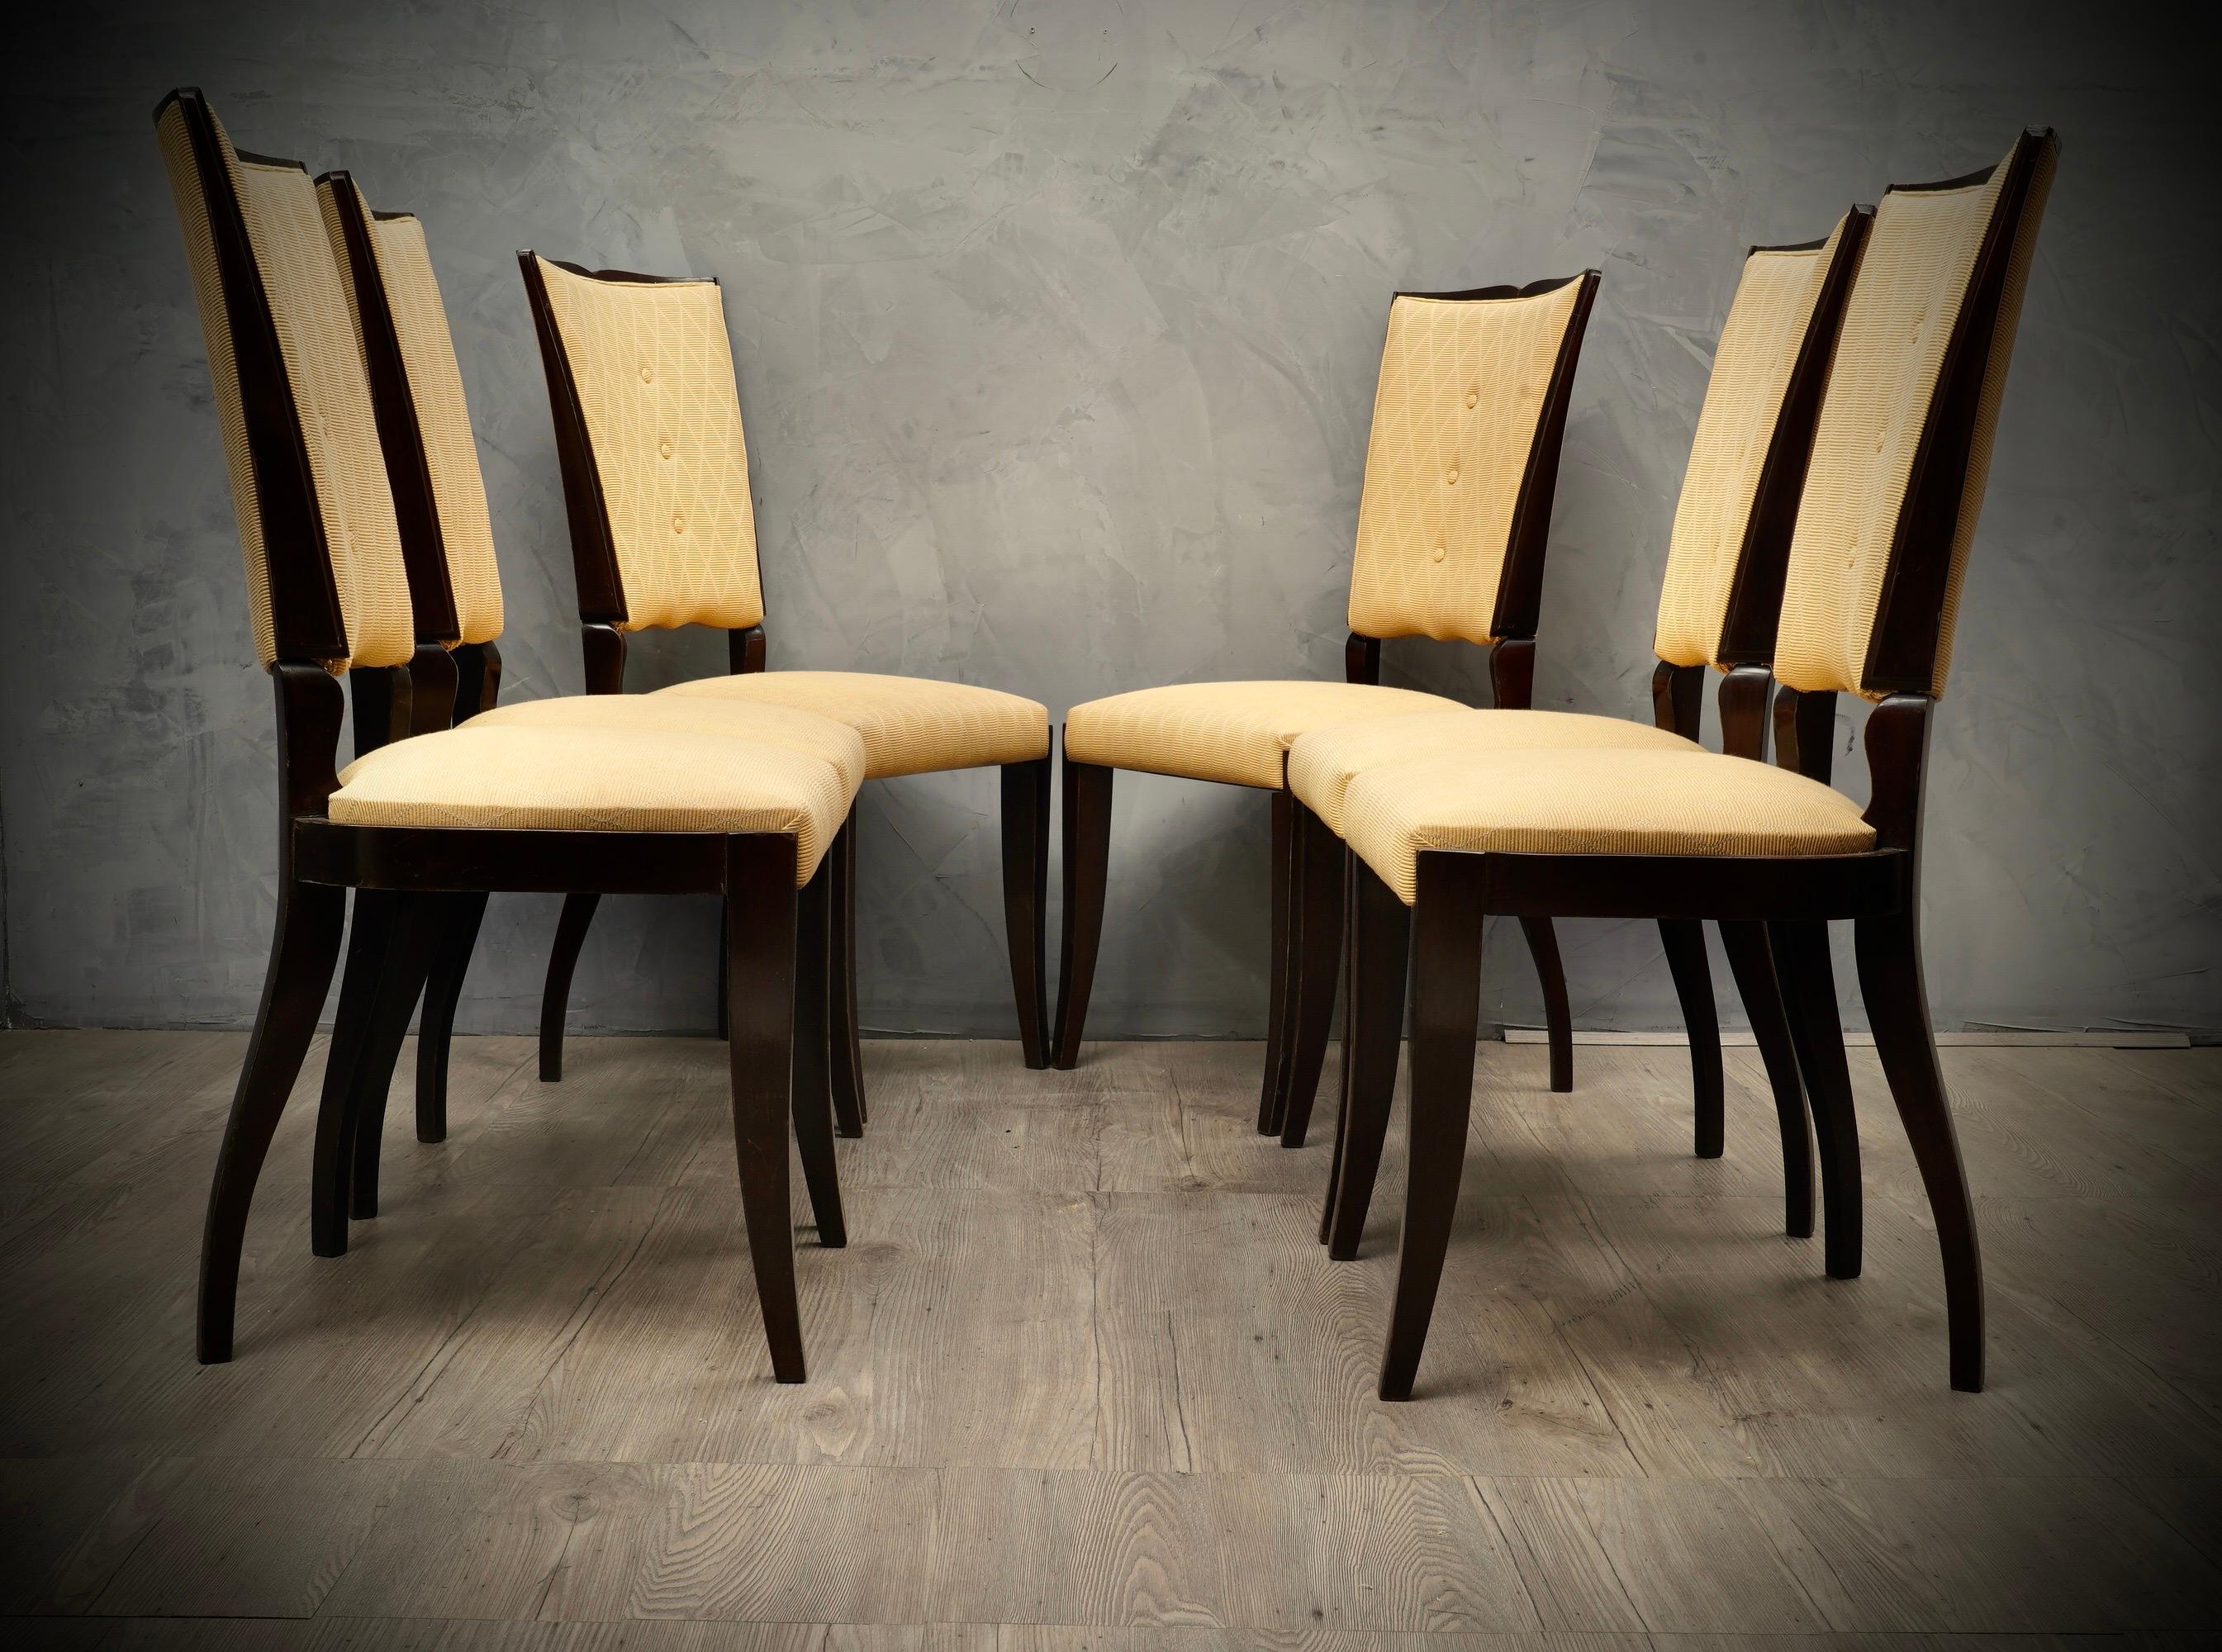 Midcentury Italian Dining Room Chairs, 1940 For Sale 2